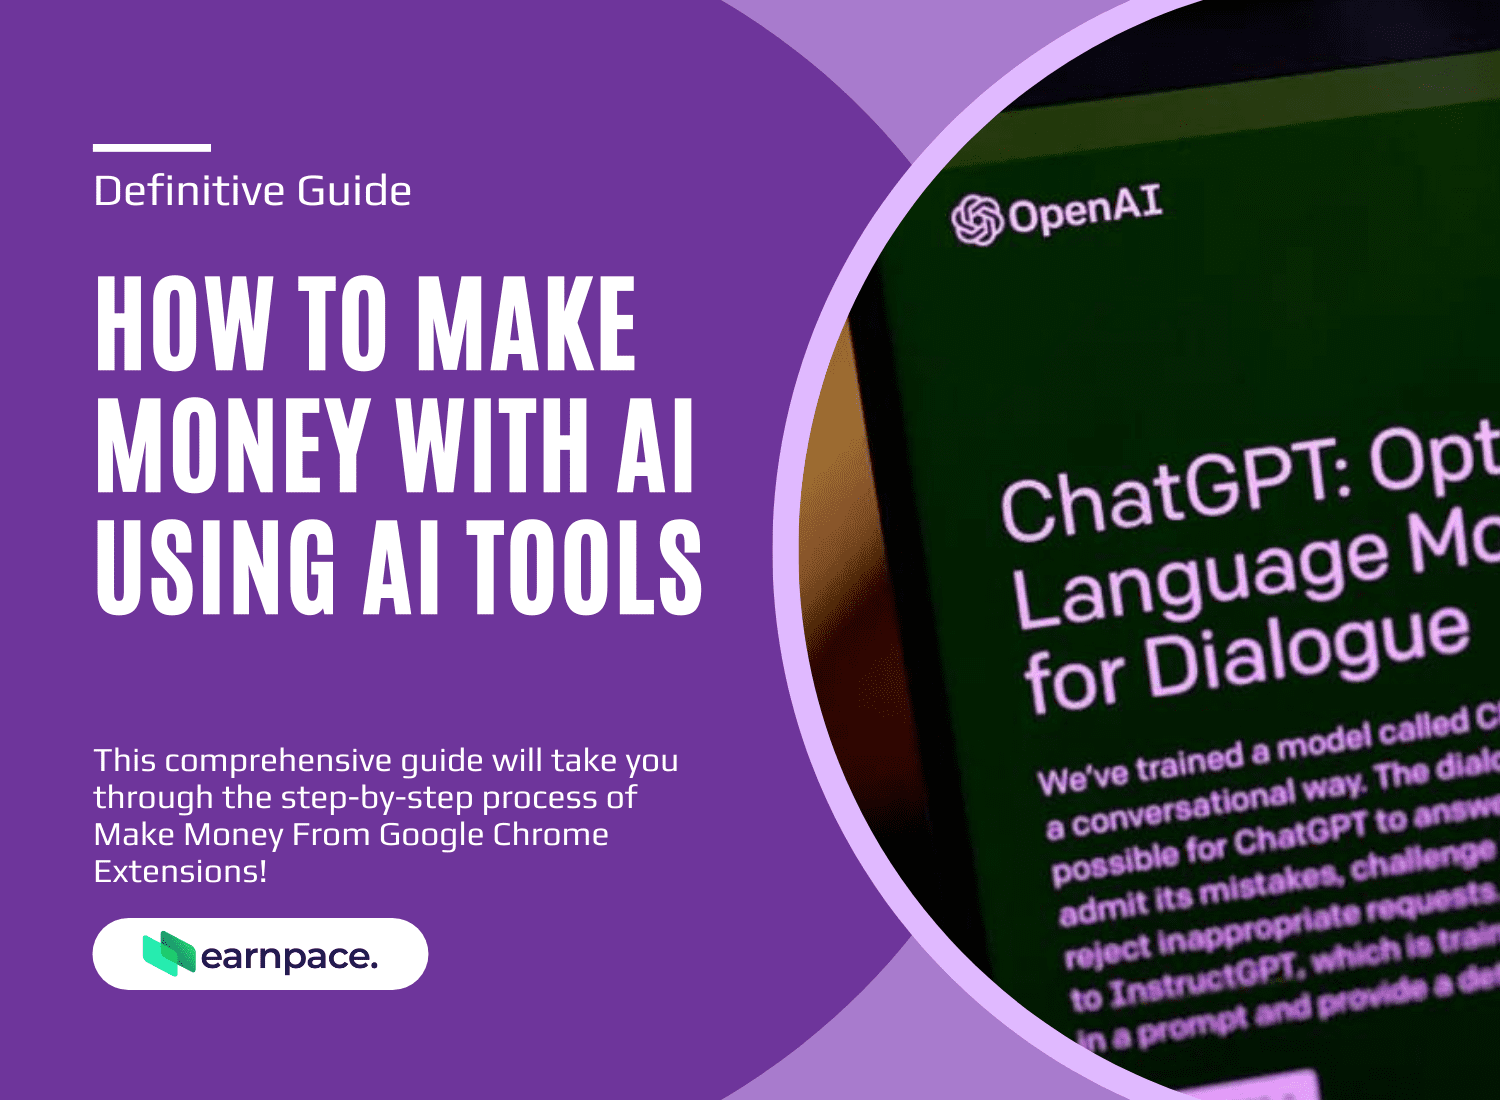 How To Make Money With AI Using AI Tools 2023 Definitive Guide EarnPace 